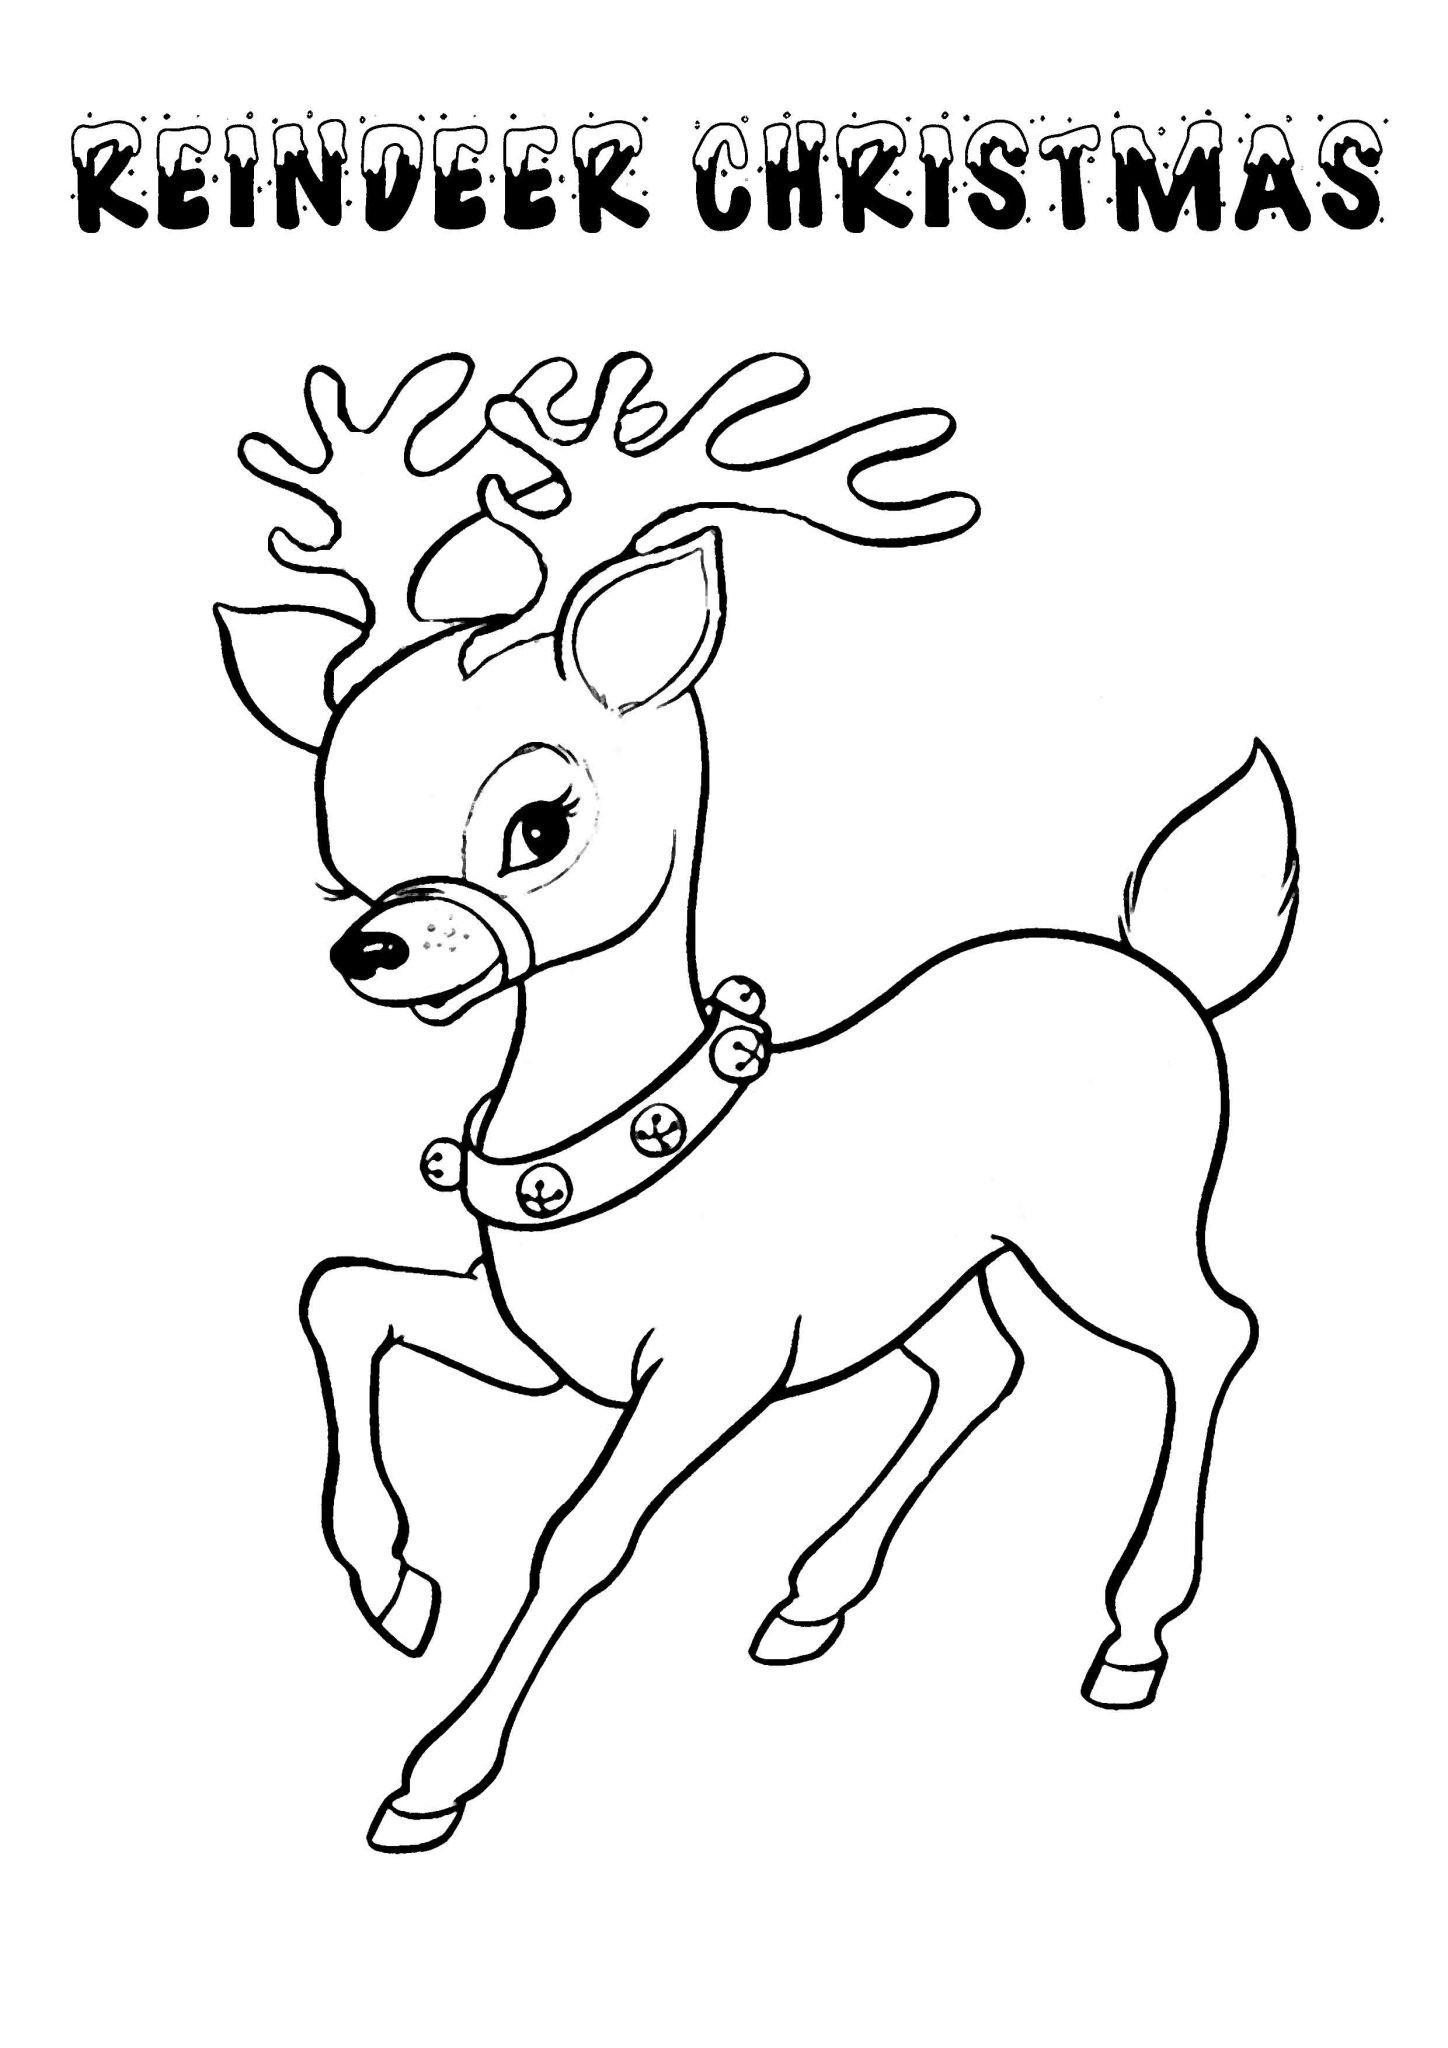 Christmas Coloring Pages For Children
 Printable Christmas Coloring Pages for Kids – Best Apps